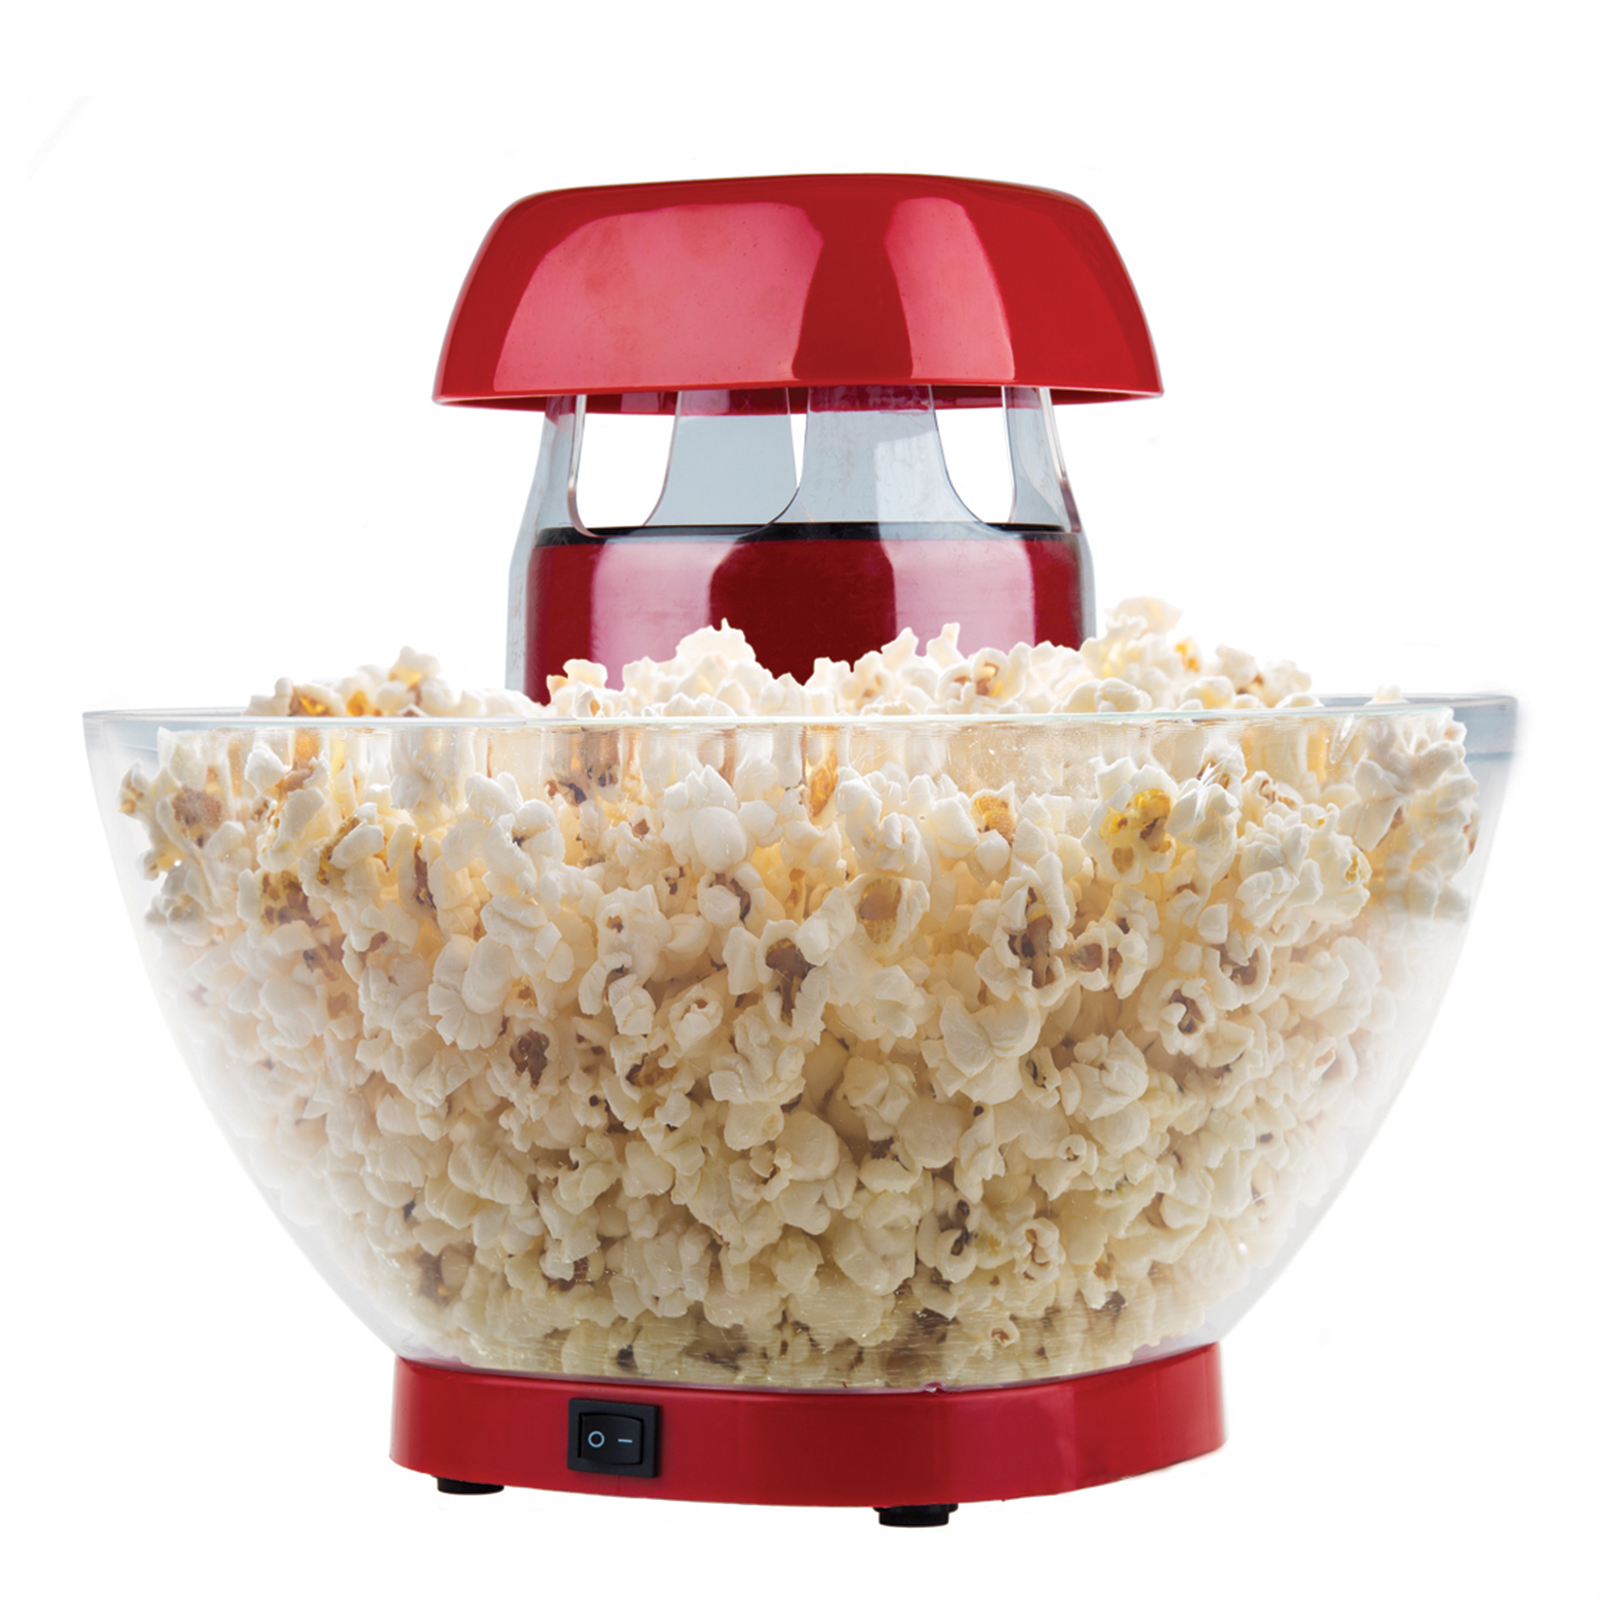 Brentwood 970105507M Jumbo 24-Cup Hot Air Popcorn Maker in Red